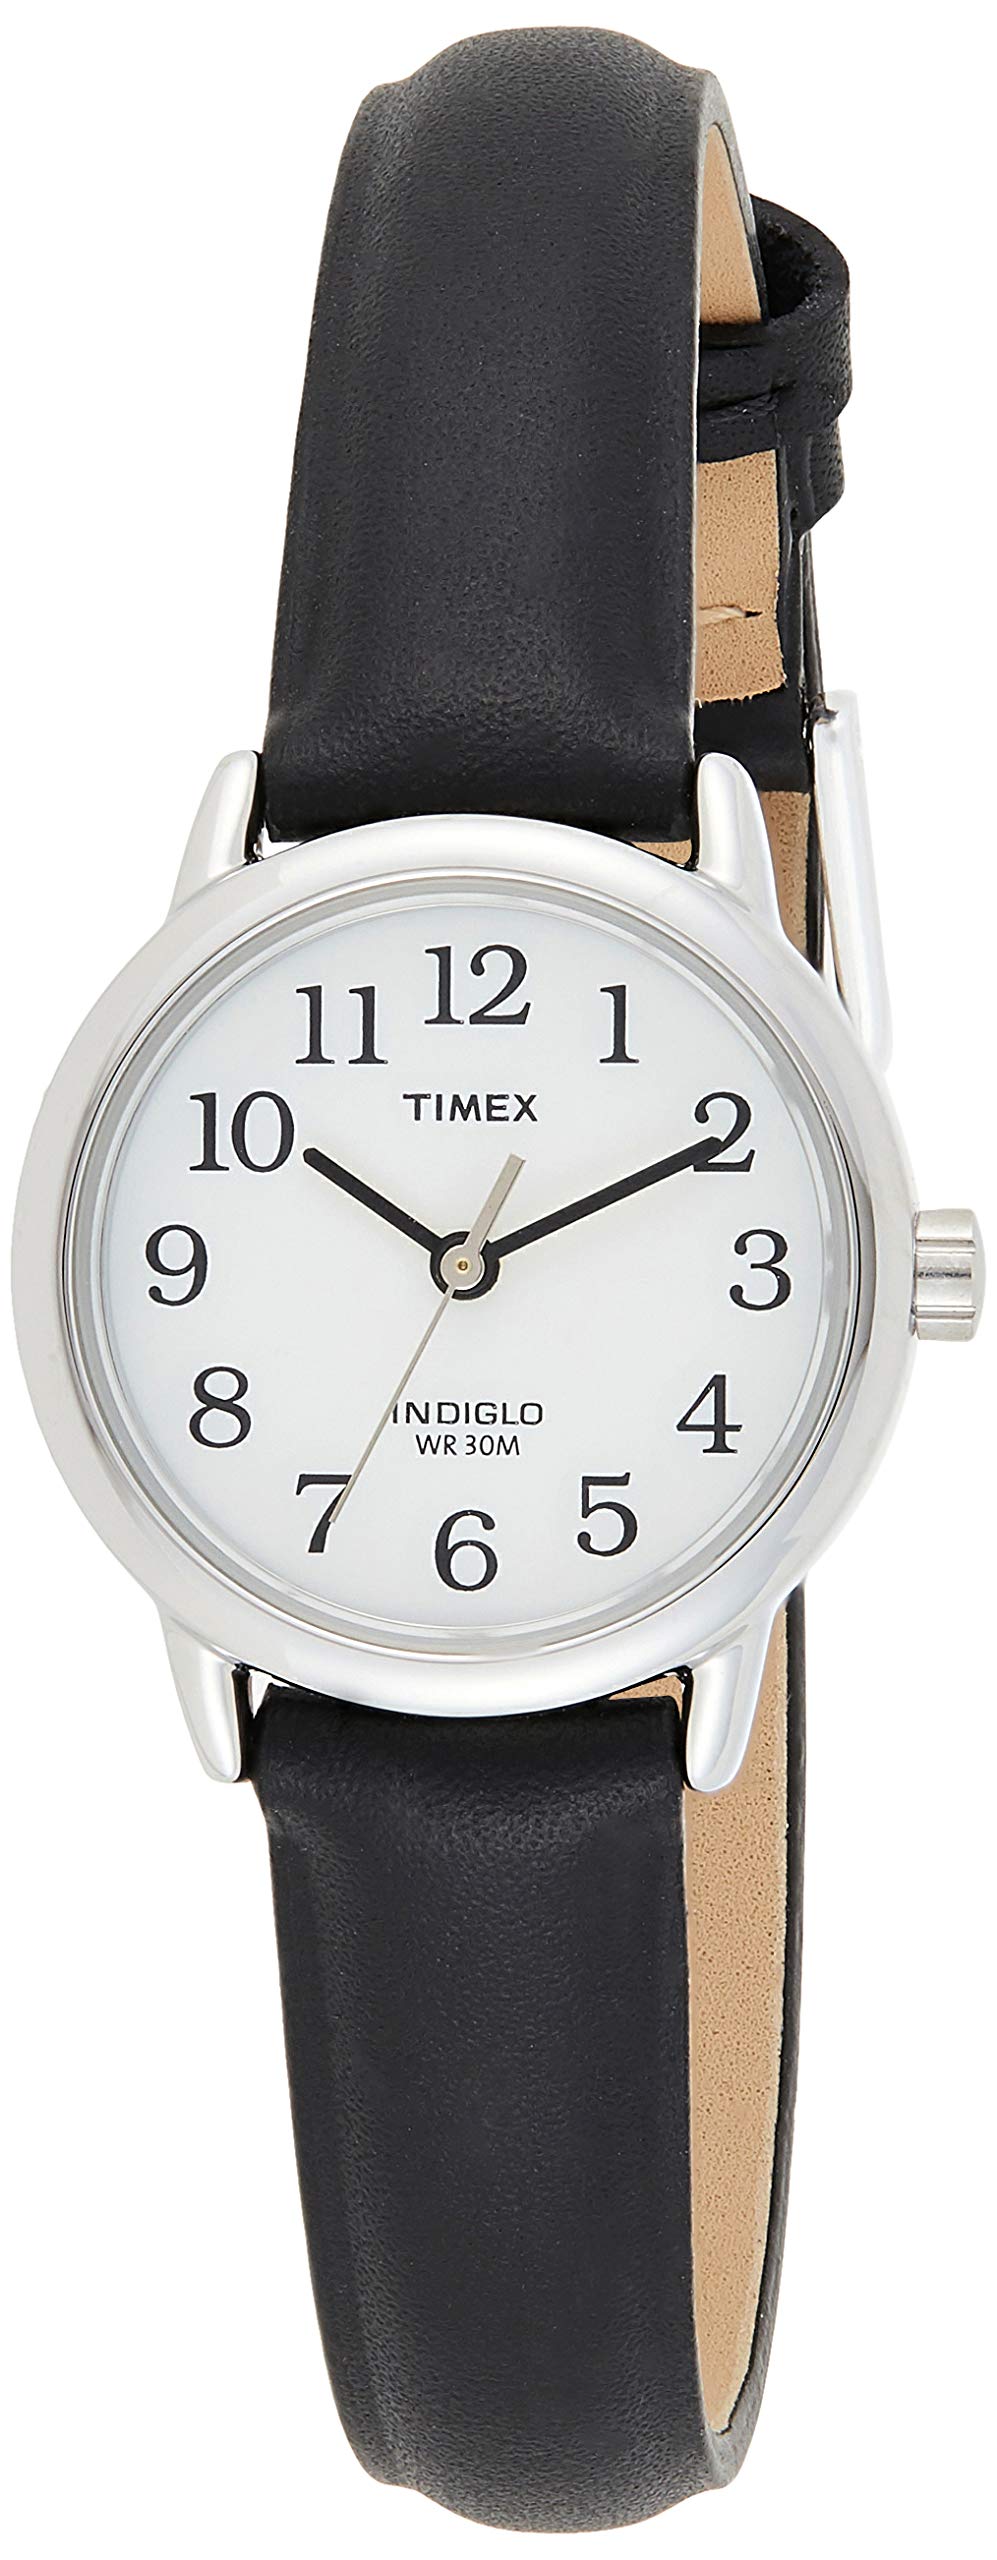 Timex Women's T20441 Easy Reader 25mm Black/Silver-Tone/White Leather Strap Watch